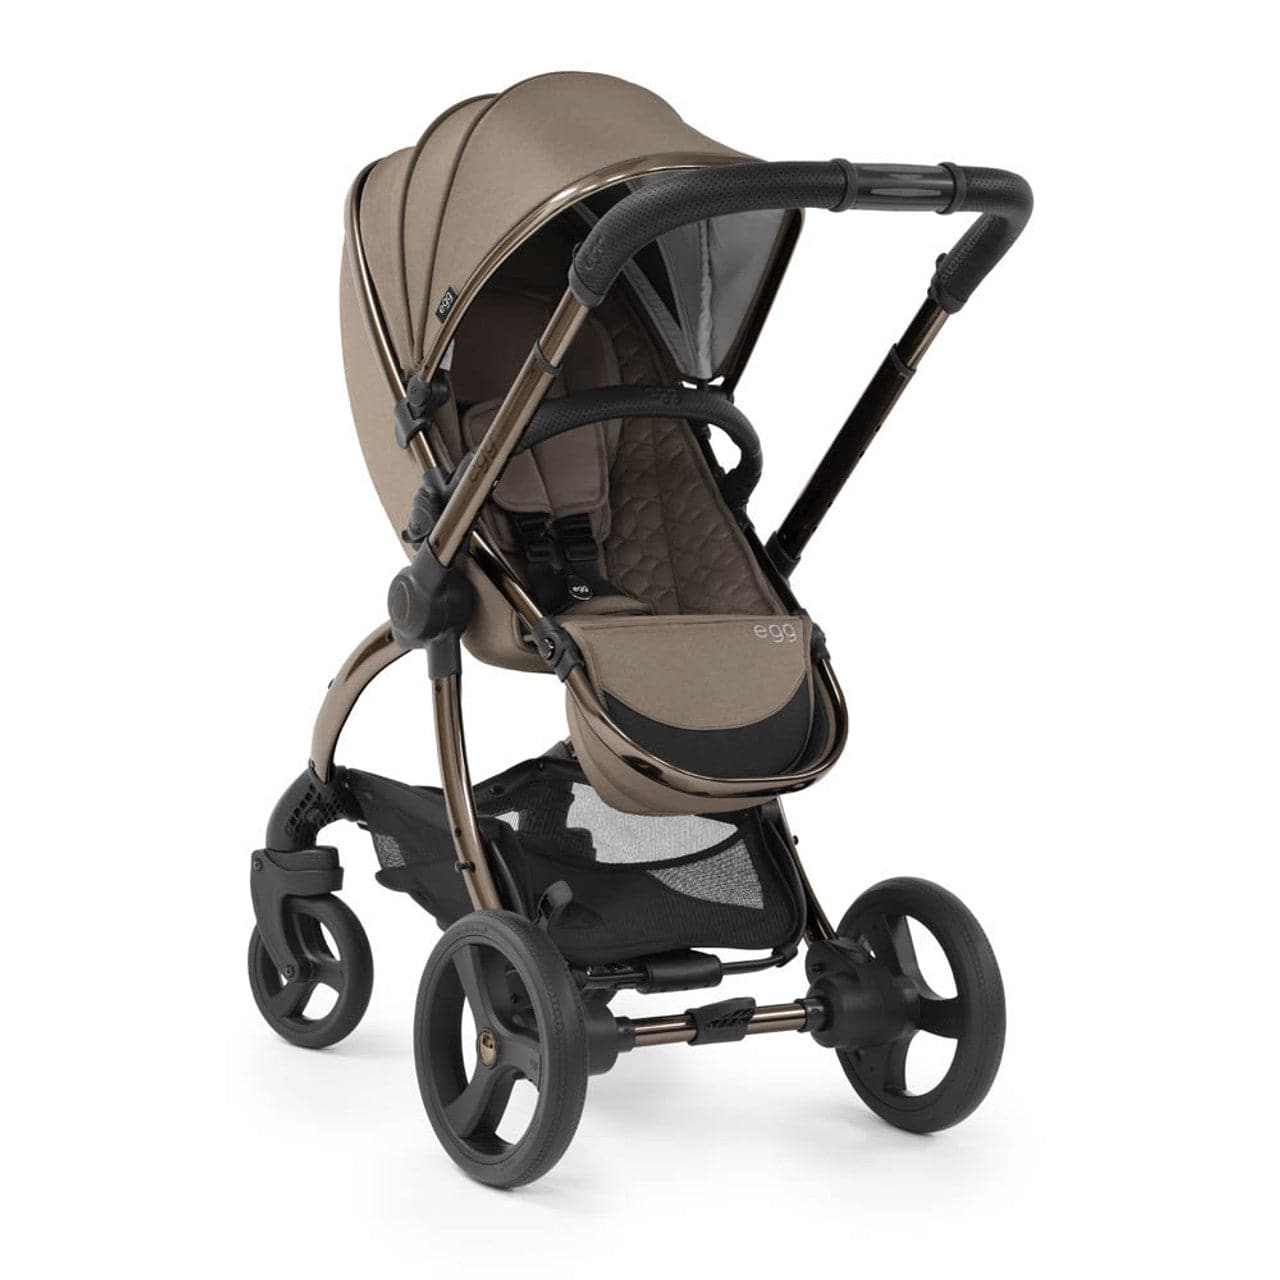 Egg® 2 Snuggle Pushchair Package - Mink - For Your Little One